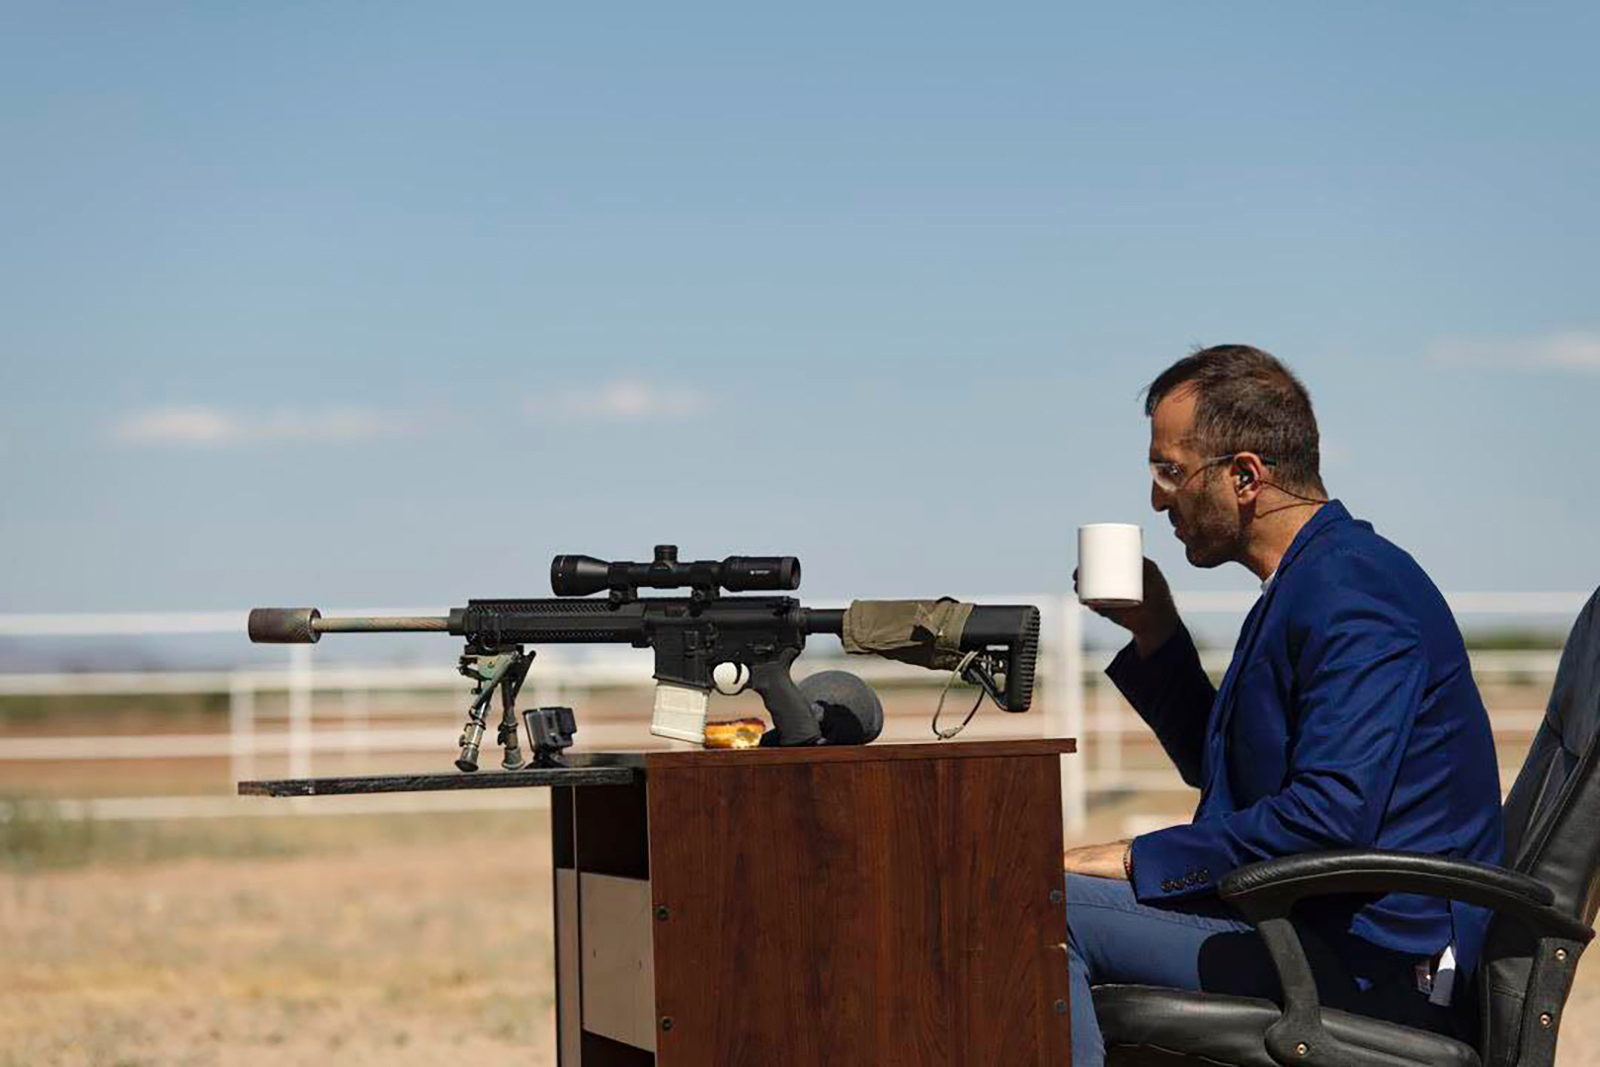 man with rifle drinks coffee at a desk in the desert